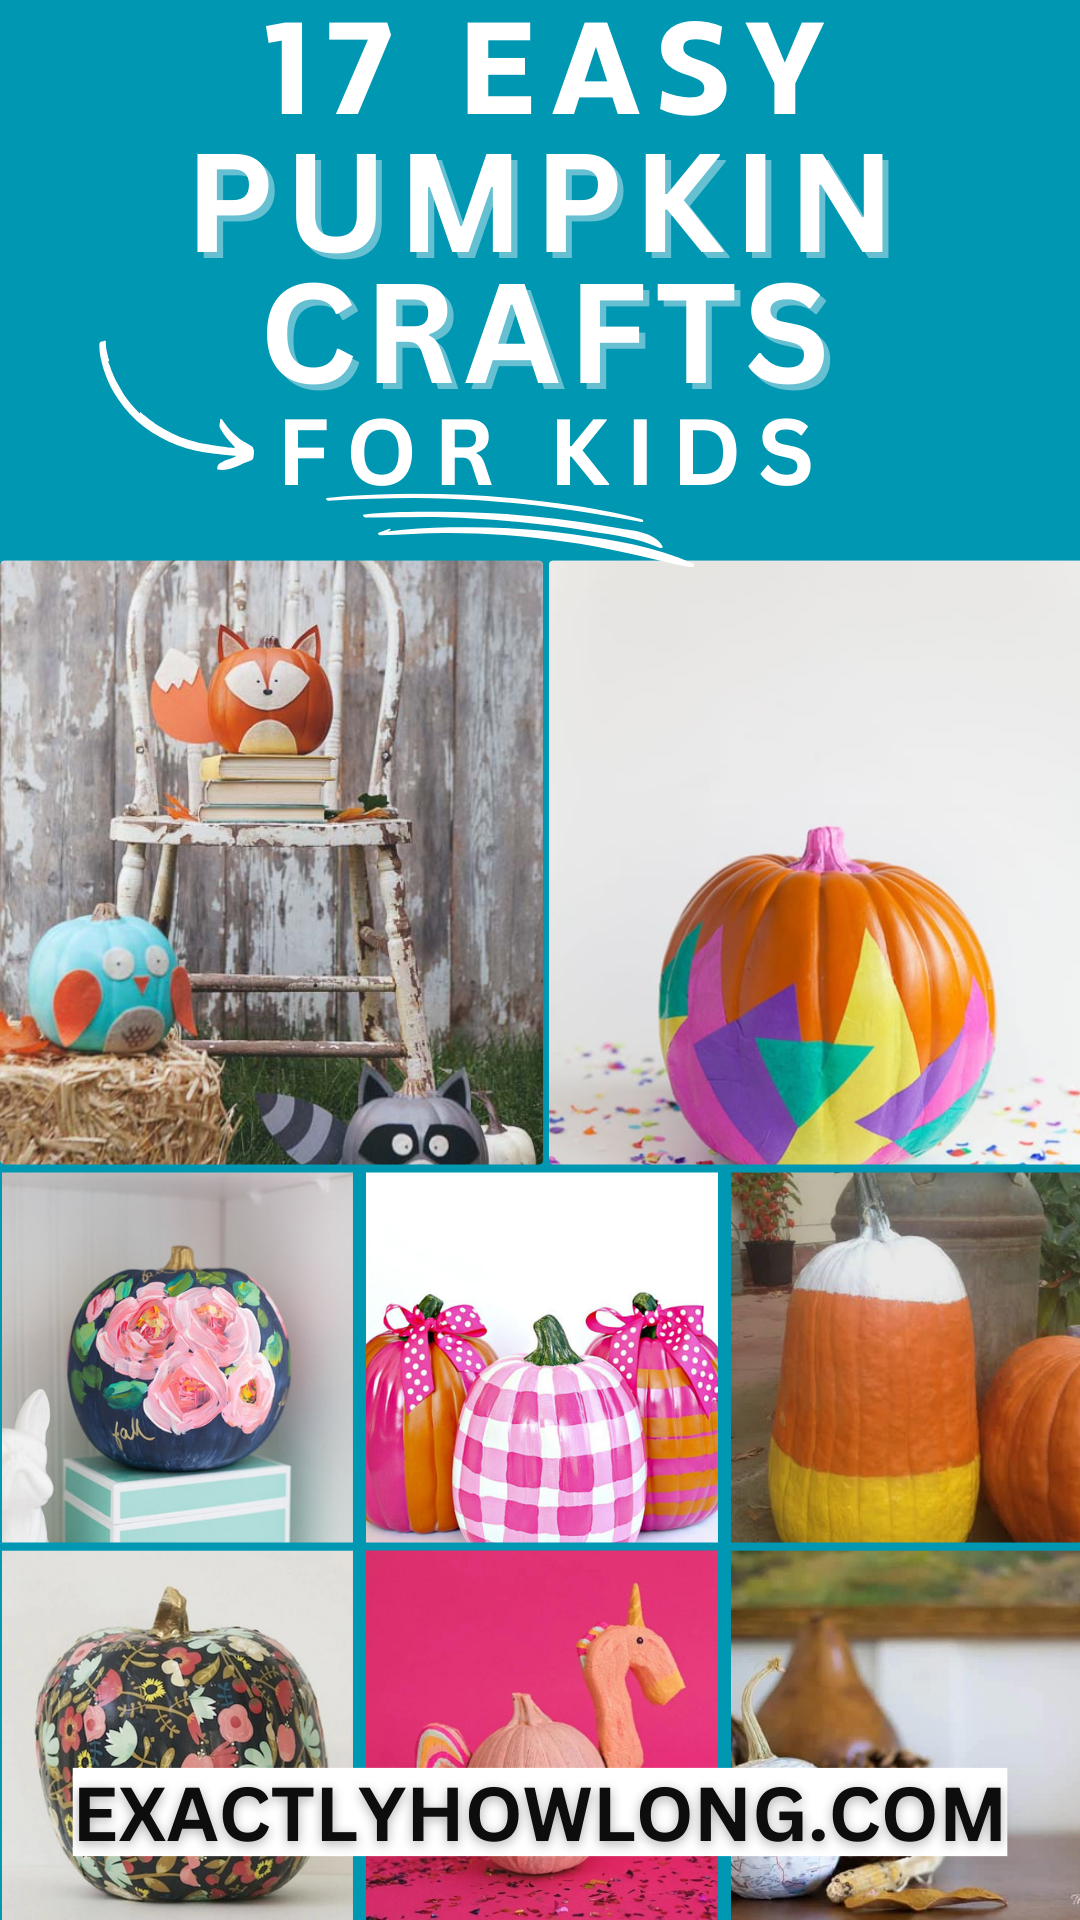 Simple dollar tree DIY pumpkin crafts suitable for both kids and adults. These fall crafts cater to both kids and adults alike.